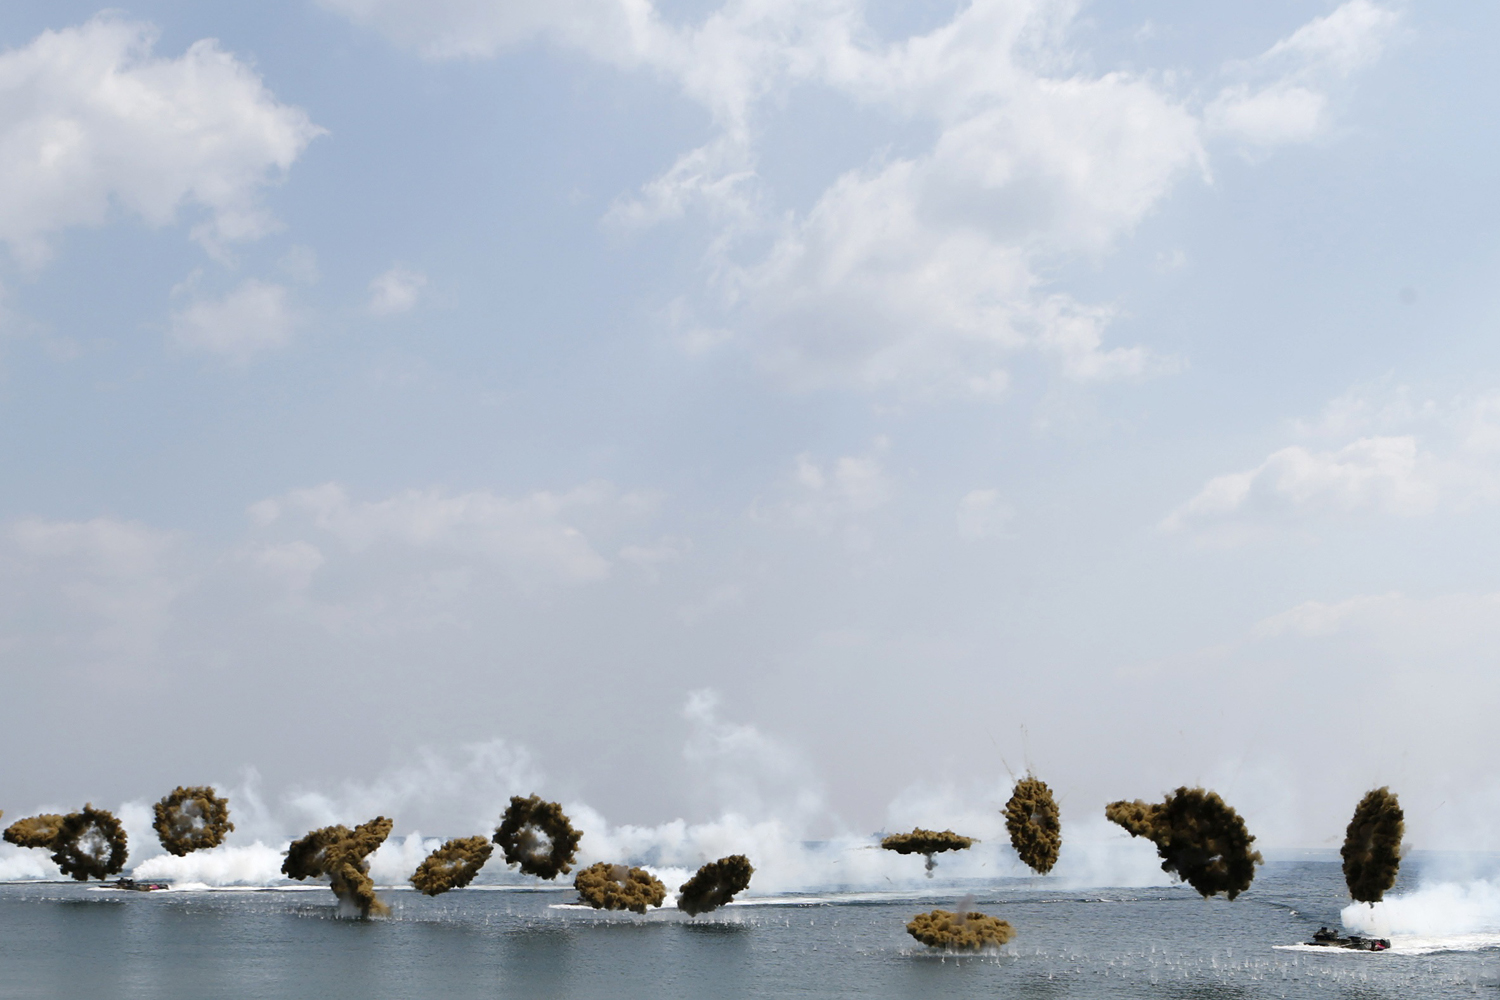 April 26, 2013. Amphibious assault vehicles of the South Korean Marine Corps throw smoke bombs as they move to land on shore during a U.S.-South Korea joint landing operation drill in Pohang, about 370 km (230 miles) southeast of Seoul.